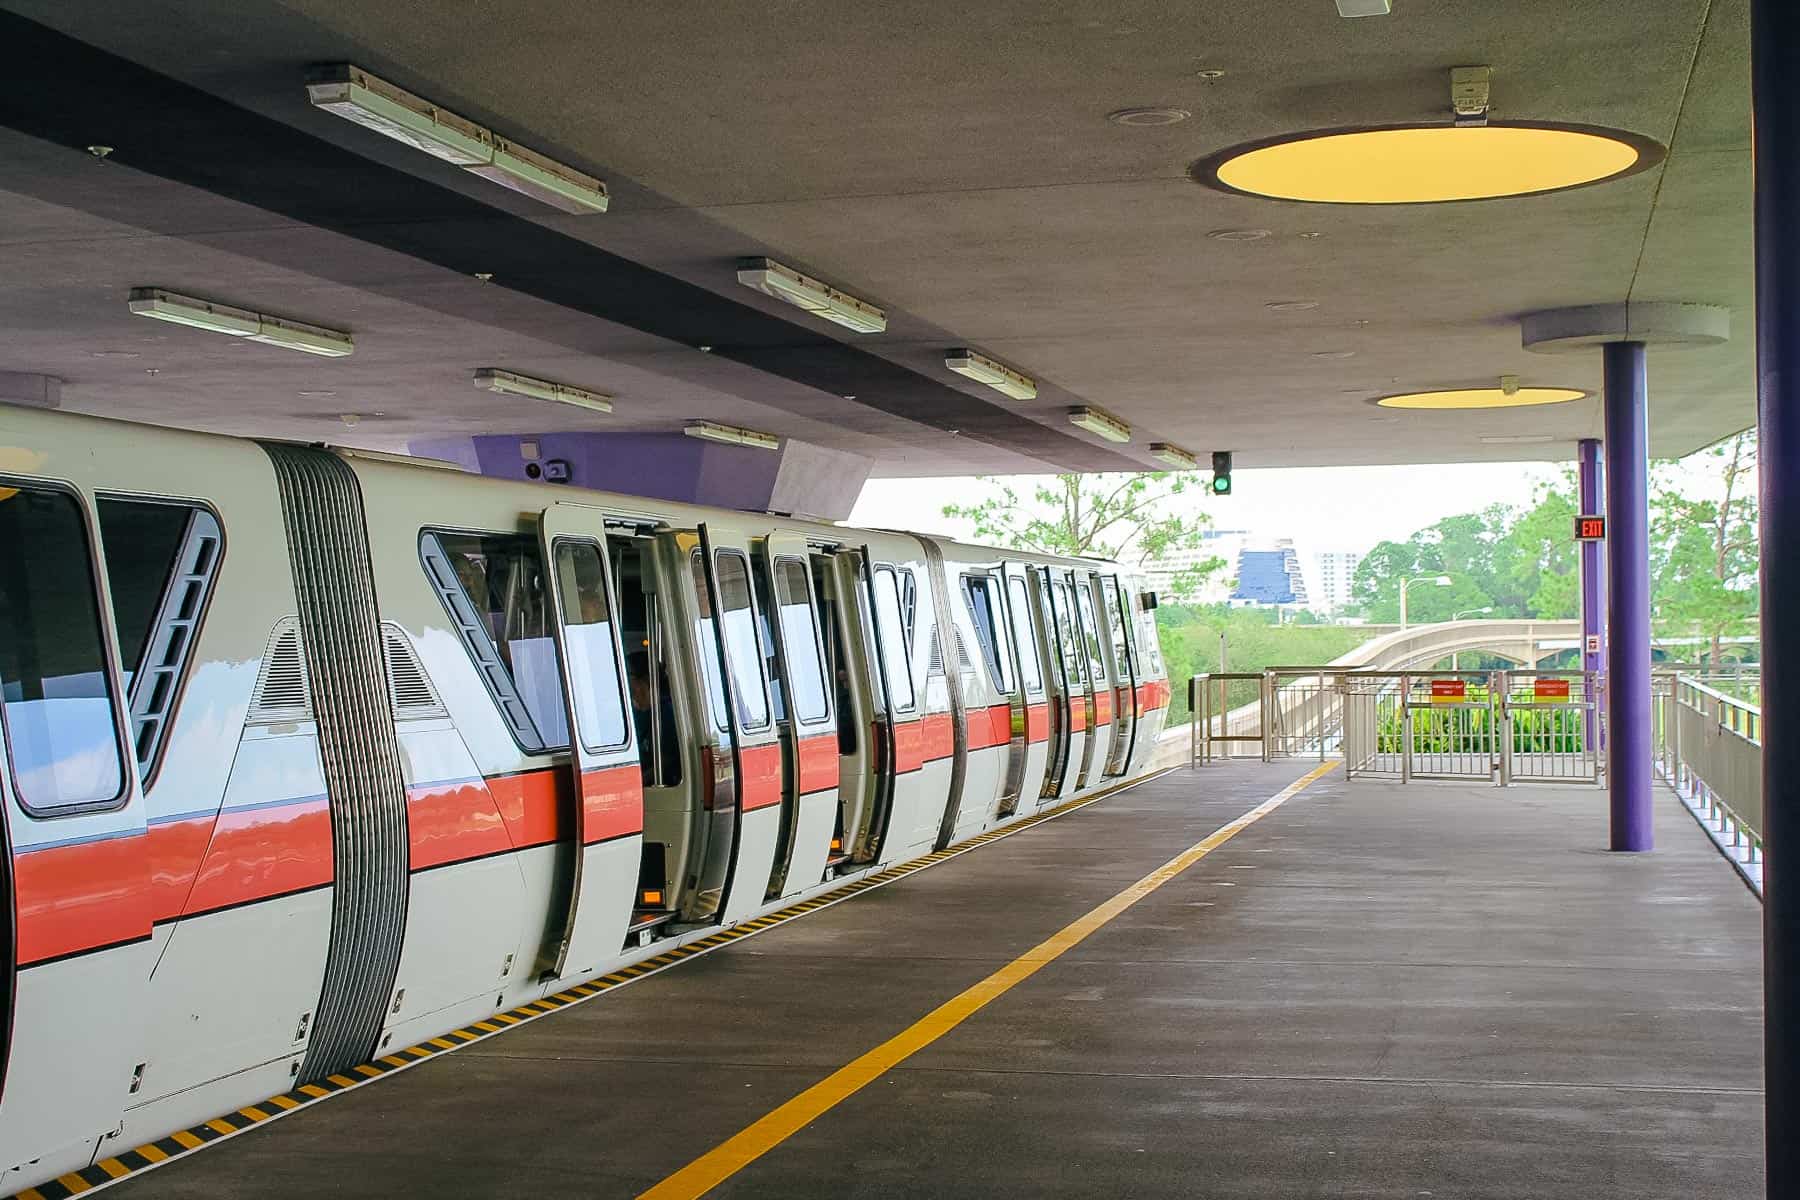 The Express Monorail is getting ready to depart the TTC and travel through the Contemporary ahead. 